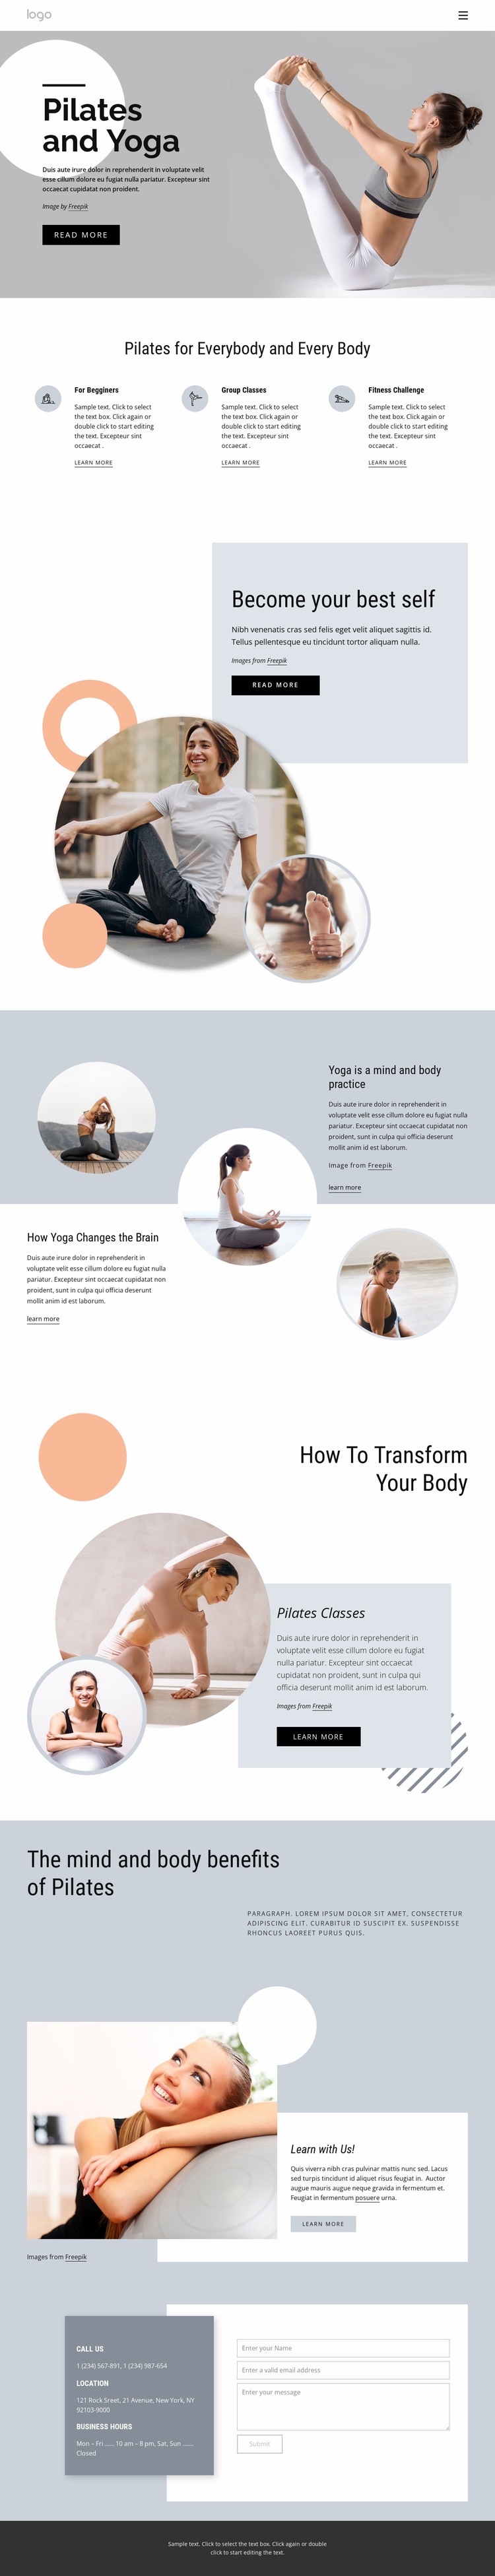 Pilates and yoga center Html Code Example